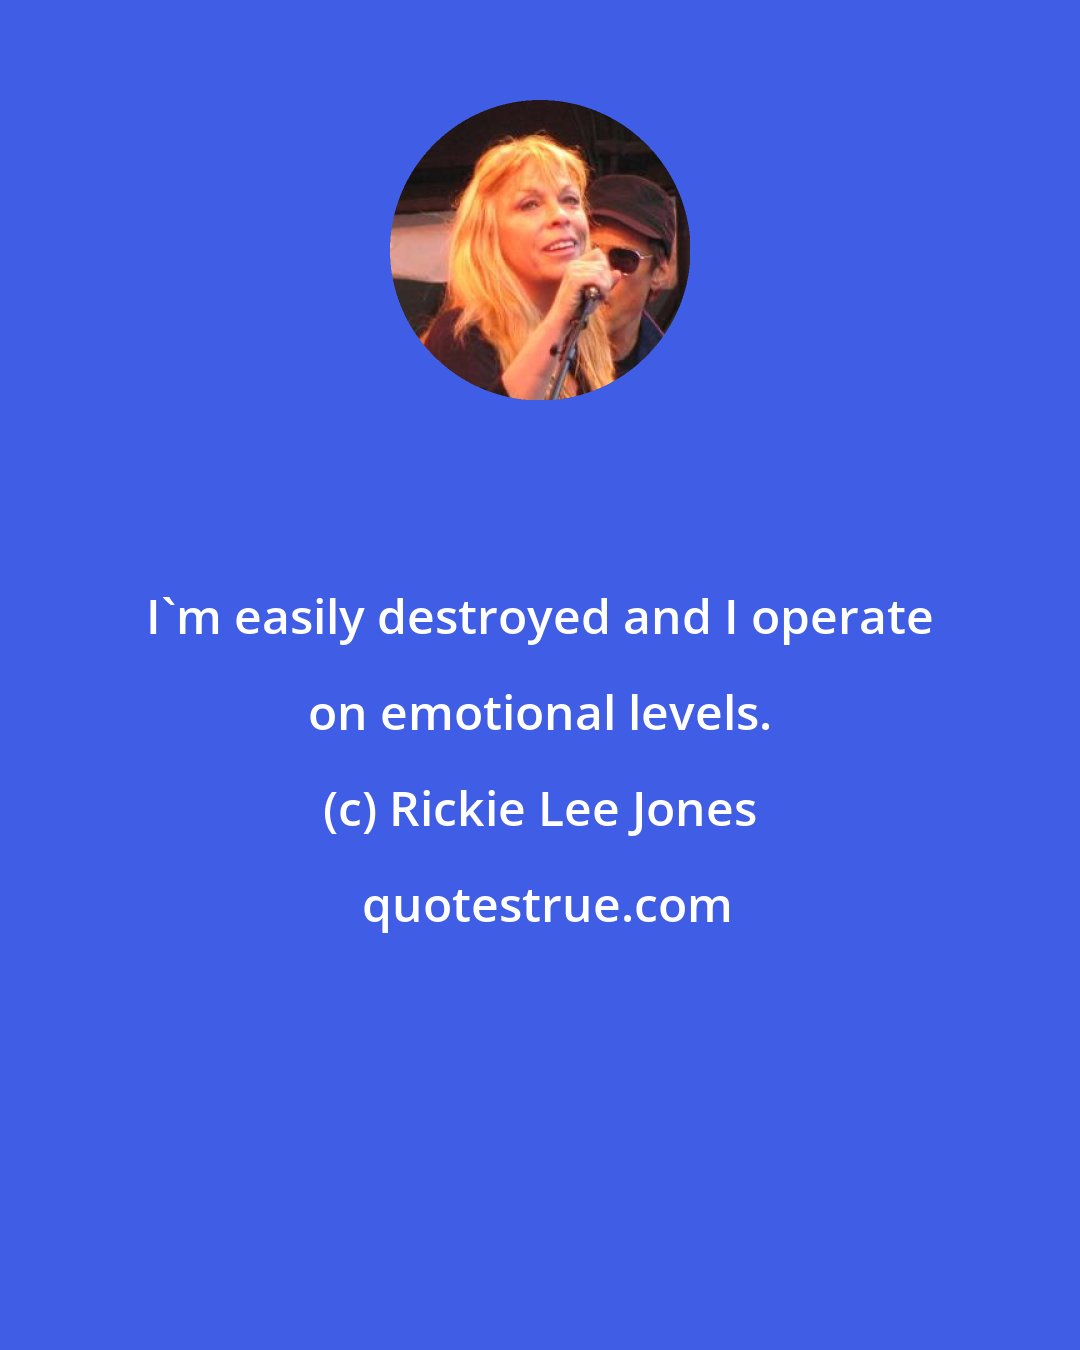 Rickie Lee Jones: I'm easily destroyed and I operate on emotional levels.